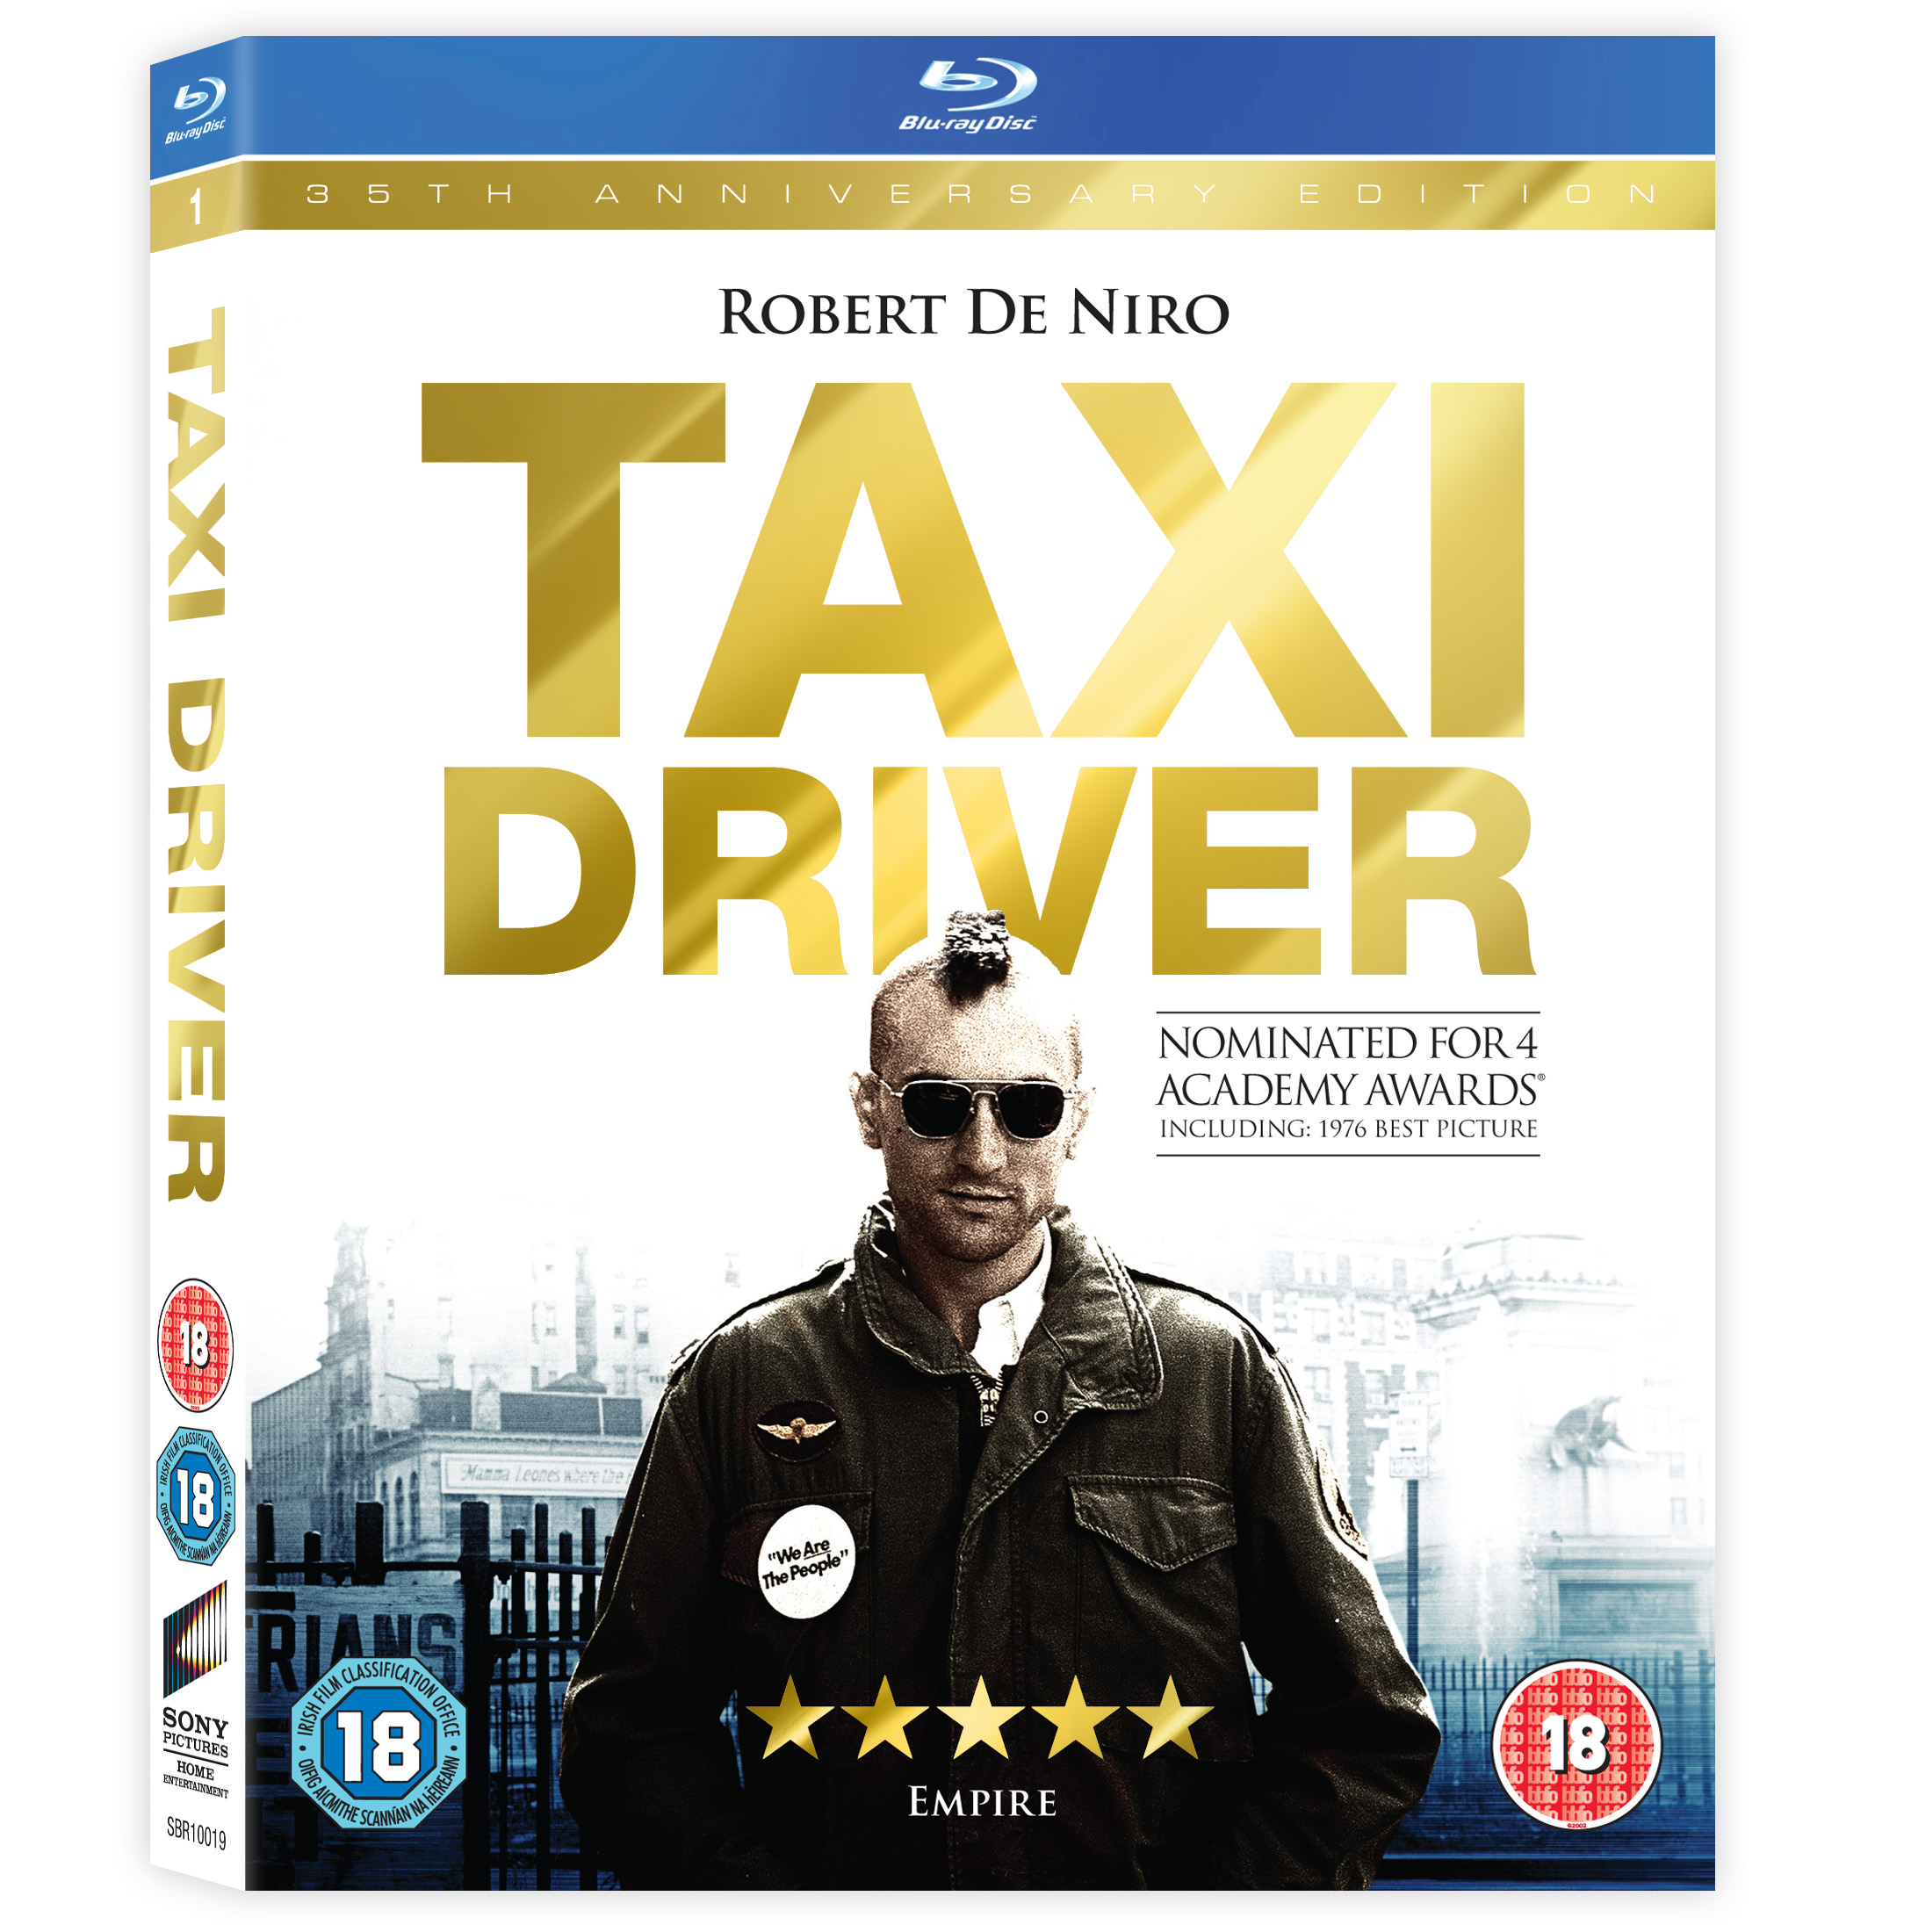 the release of Taxi Driver